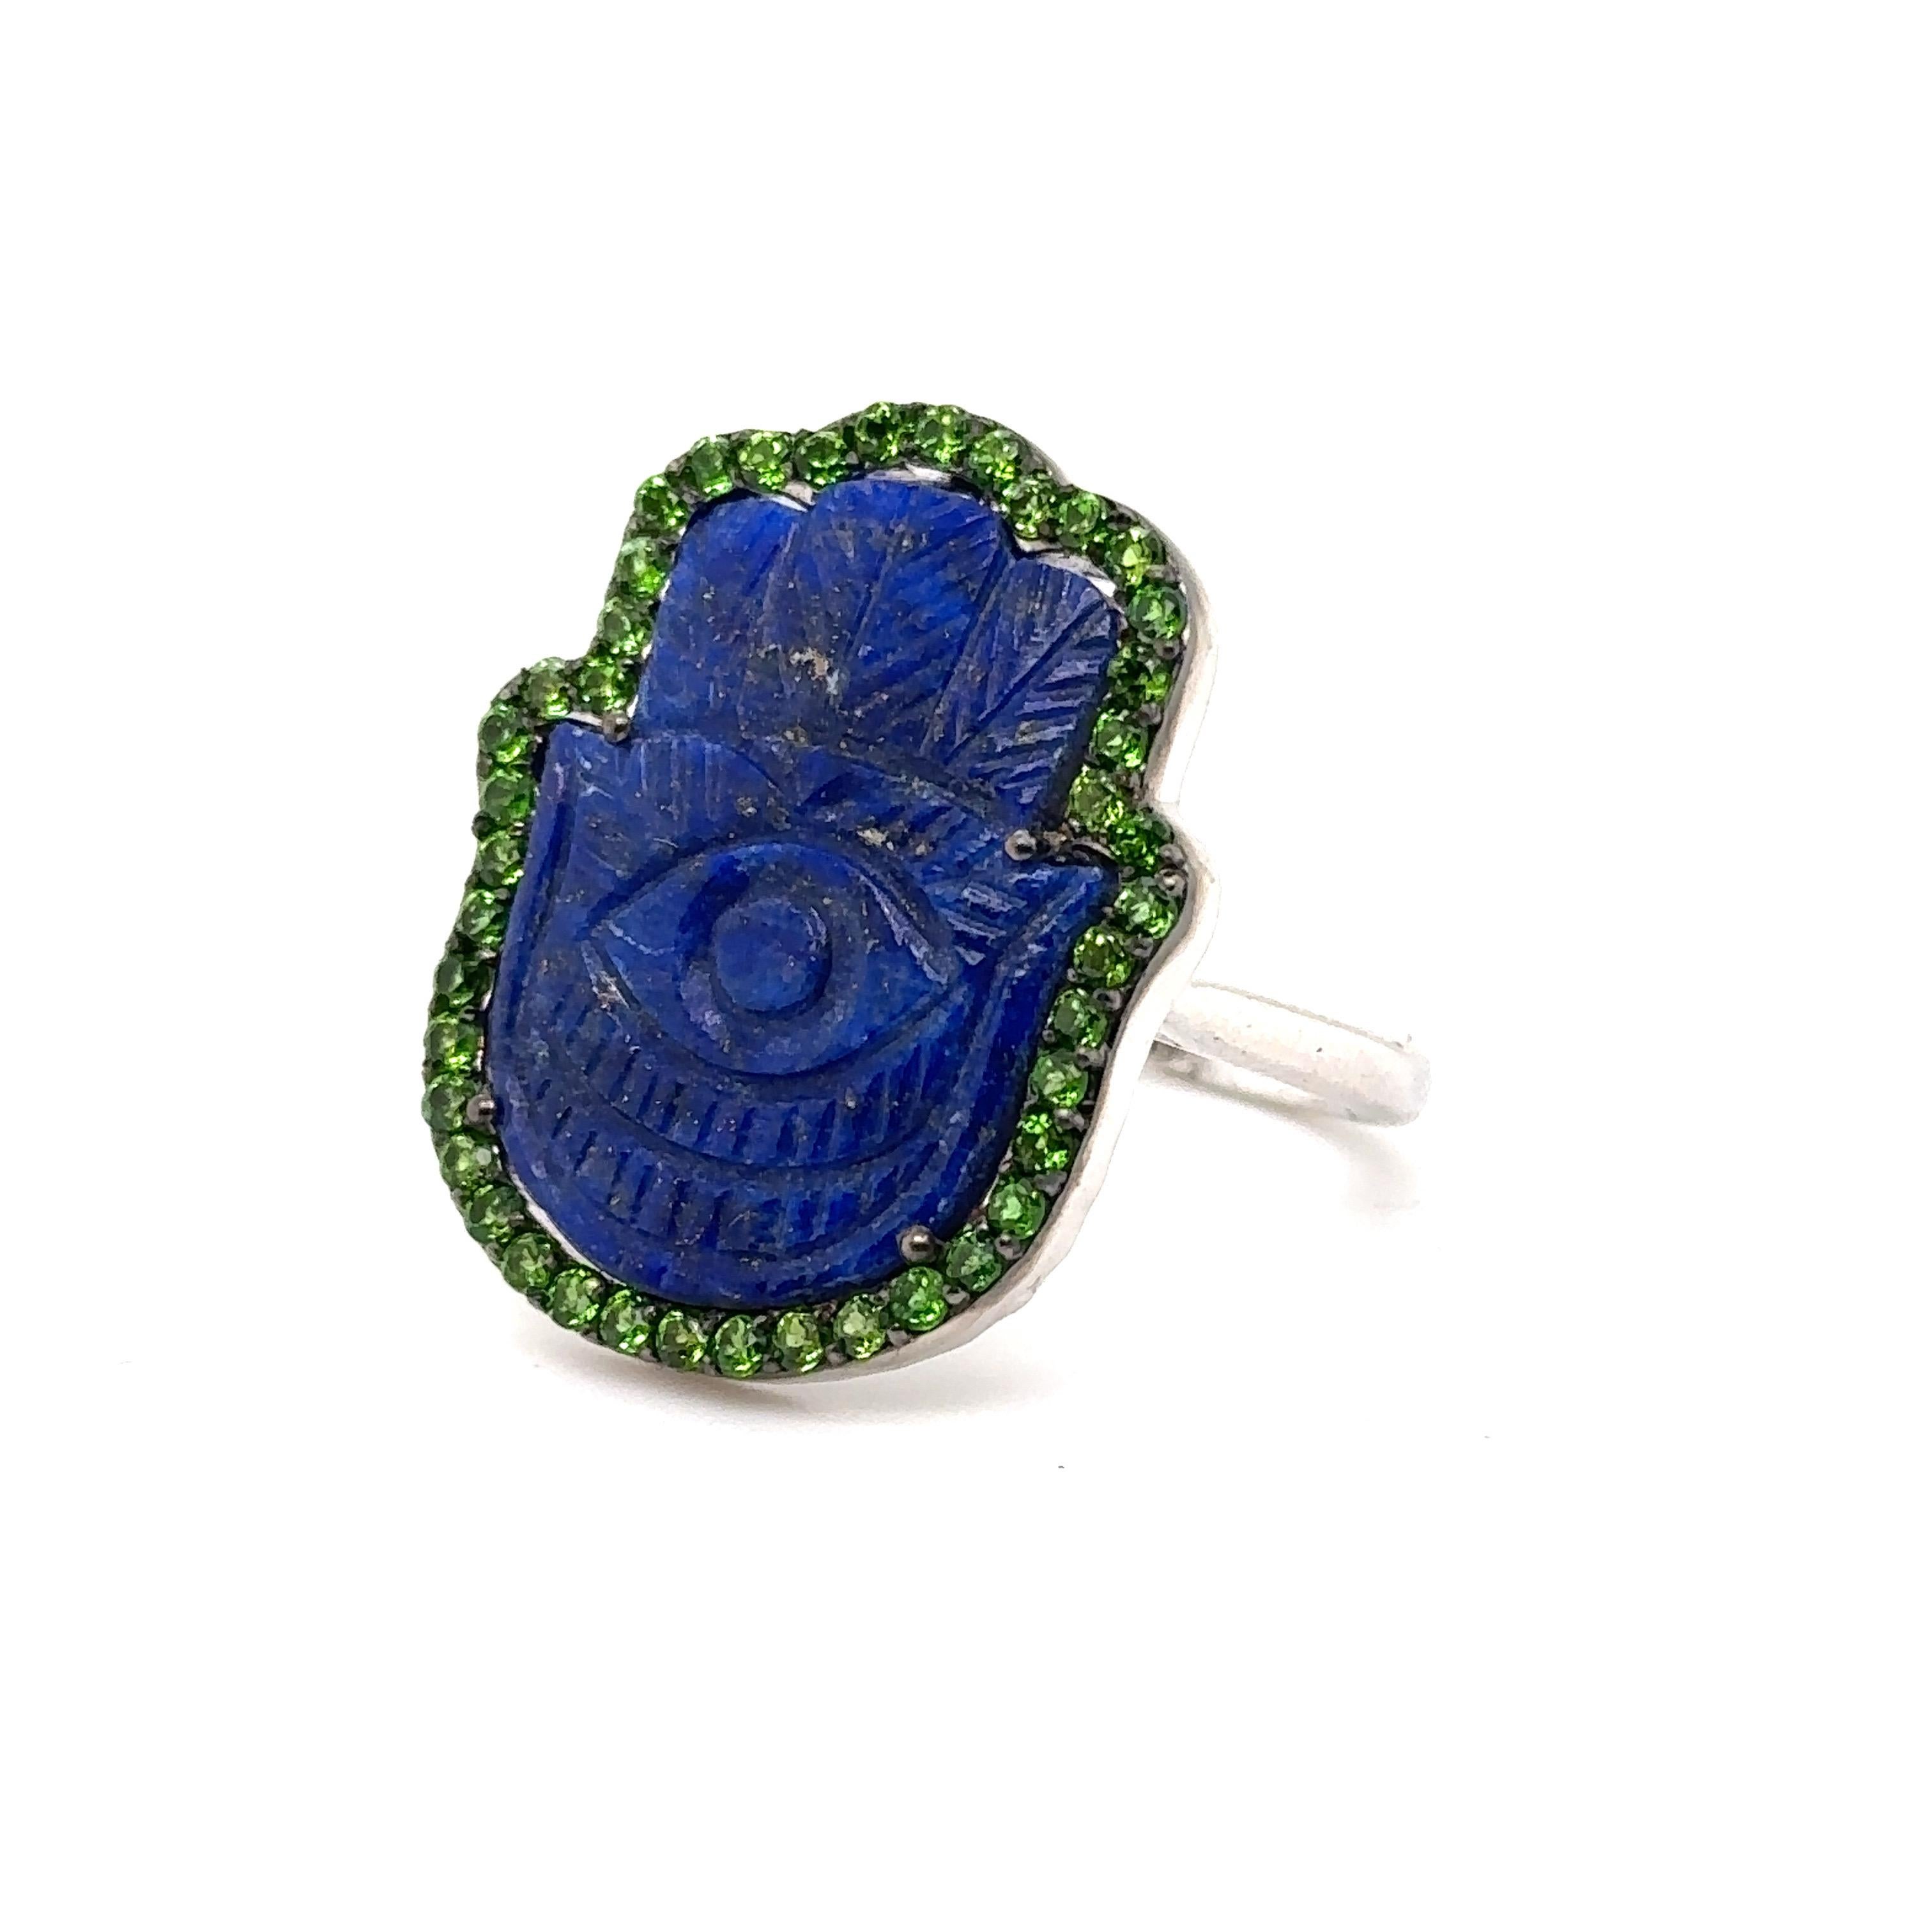 JAS-19-1962 - STERLING SILVER 10.00CT LAPIS HAMSA RING with CHROME DIOPSIDES 1